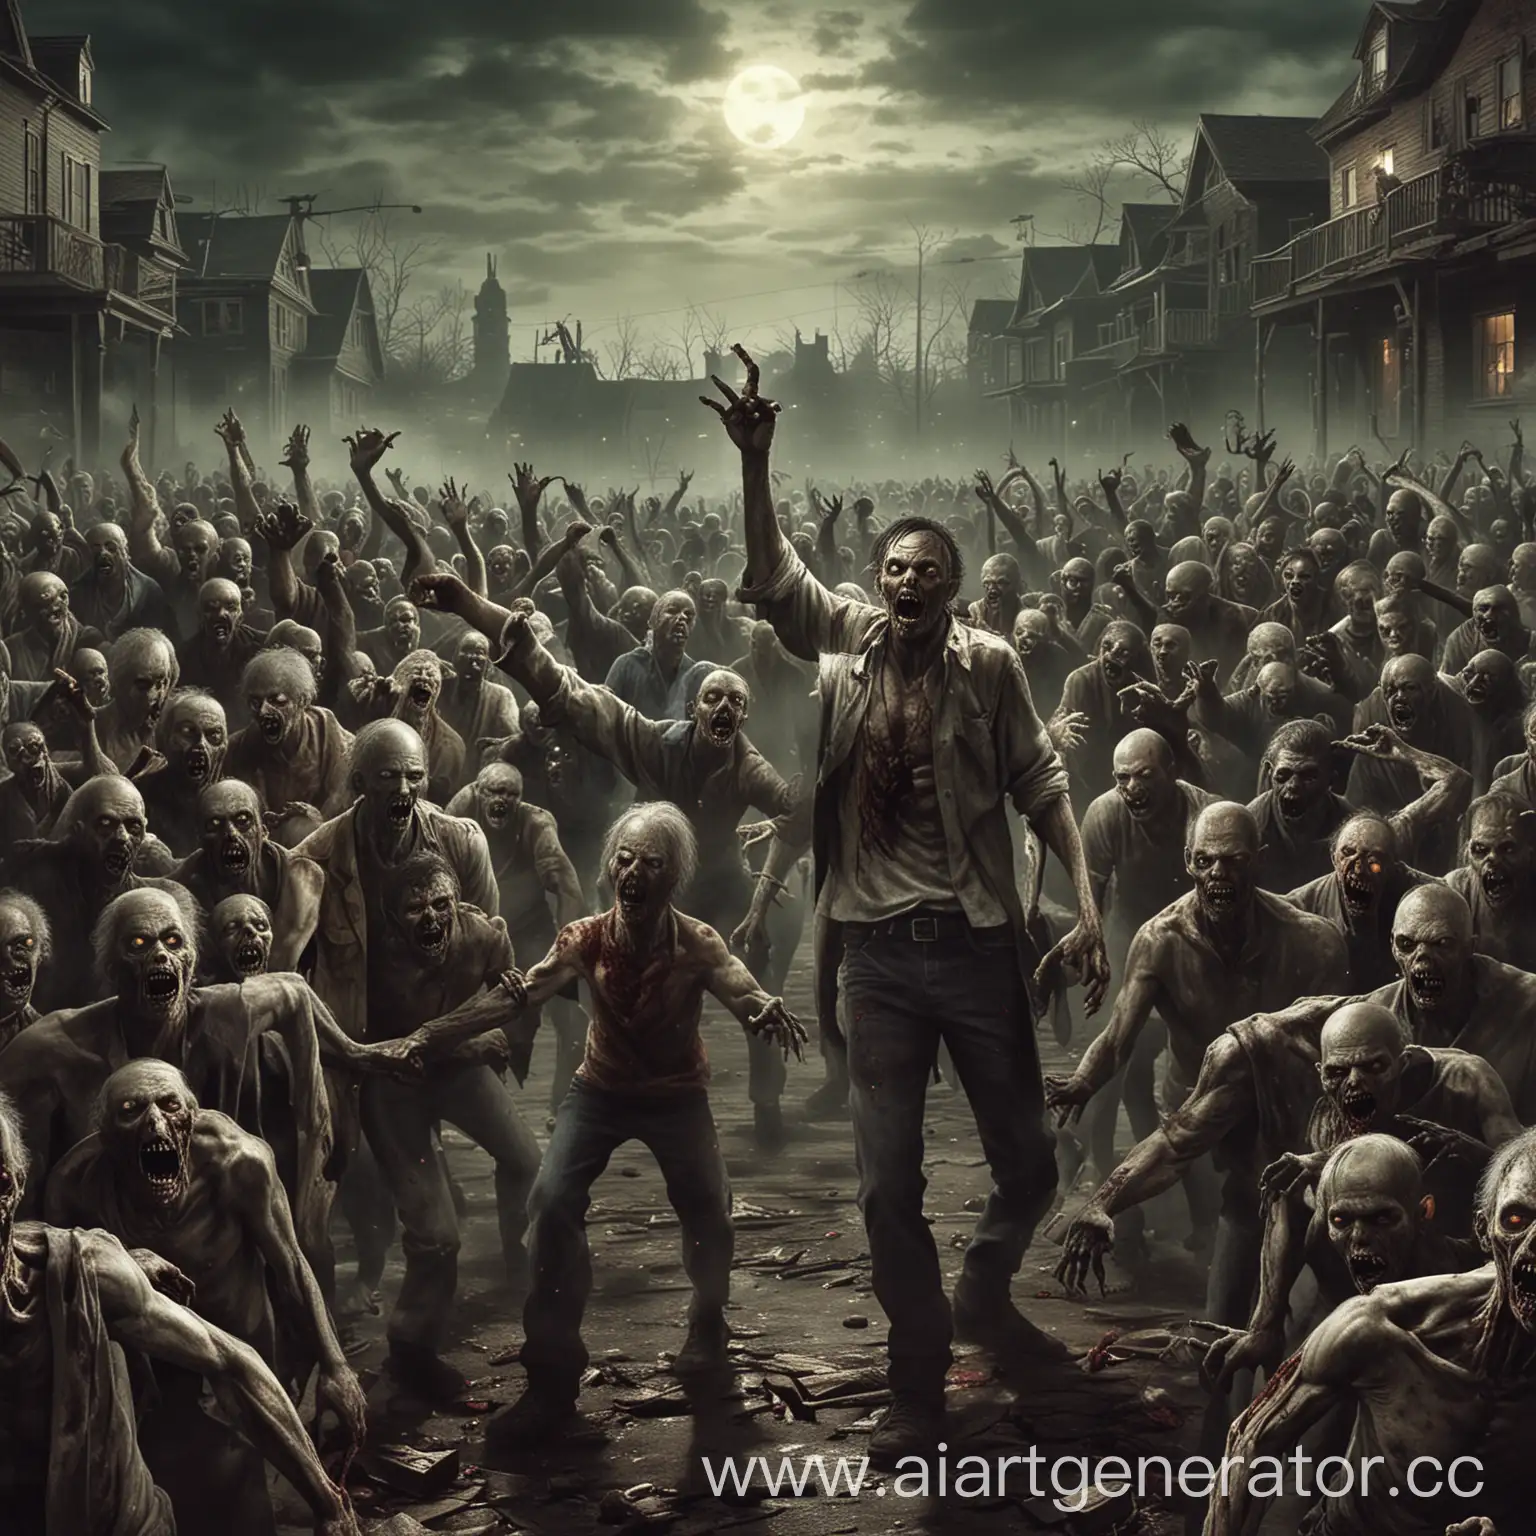 Apocalyptic-Scene-with-Zombie-Horde-in-a-Desolate-World